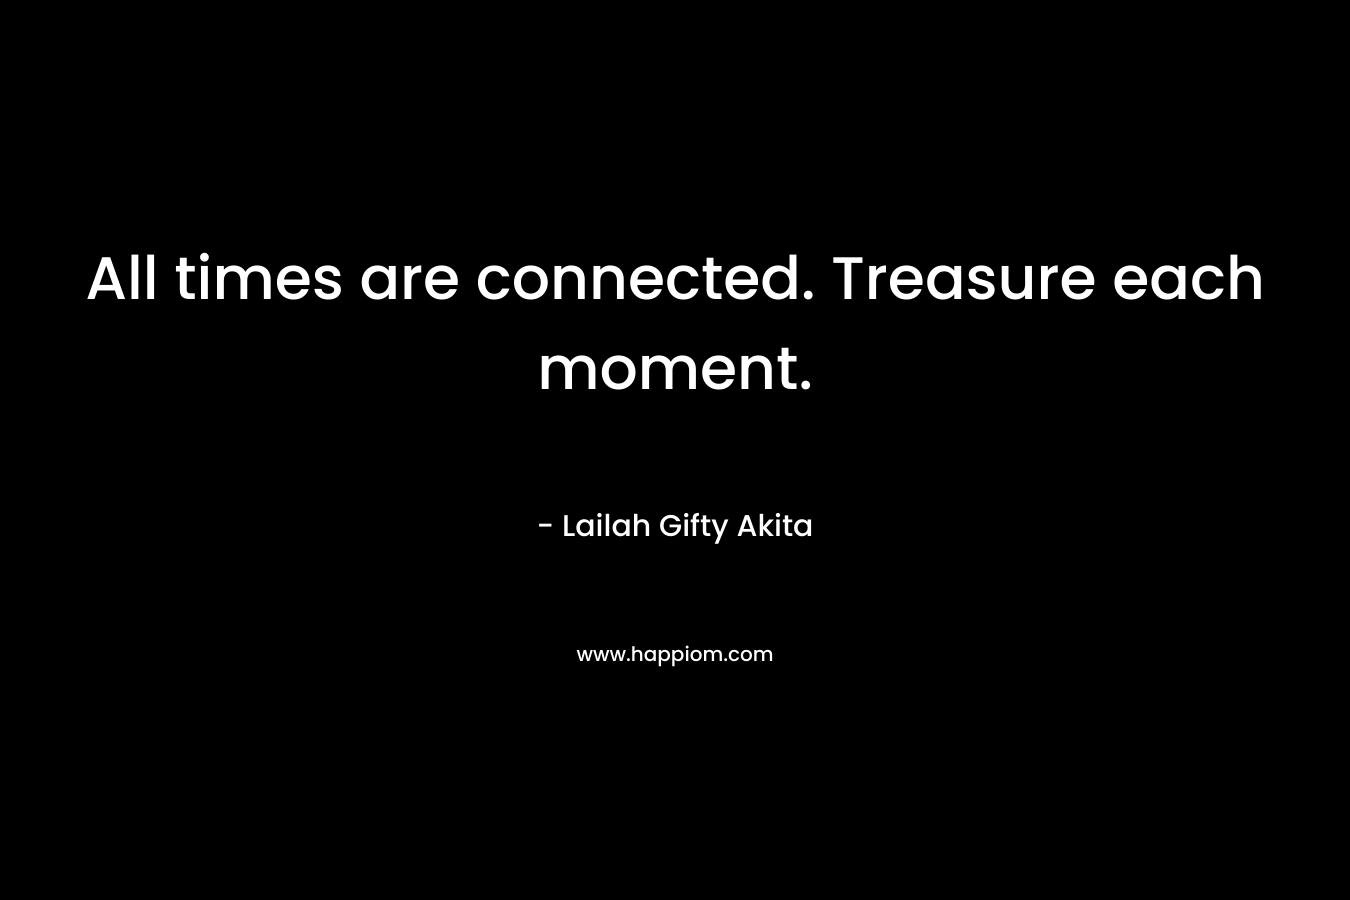 All times are connected. Treasure each moment.